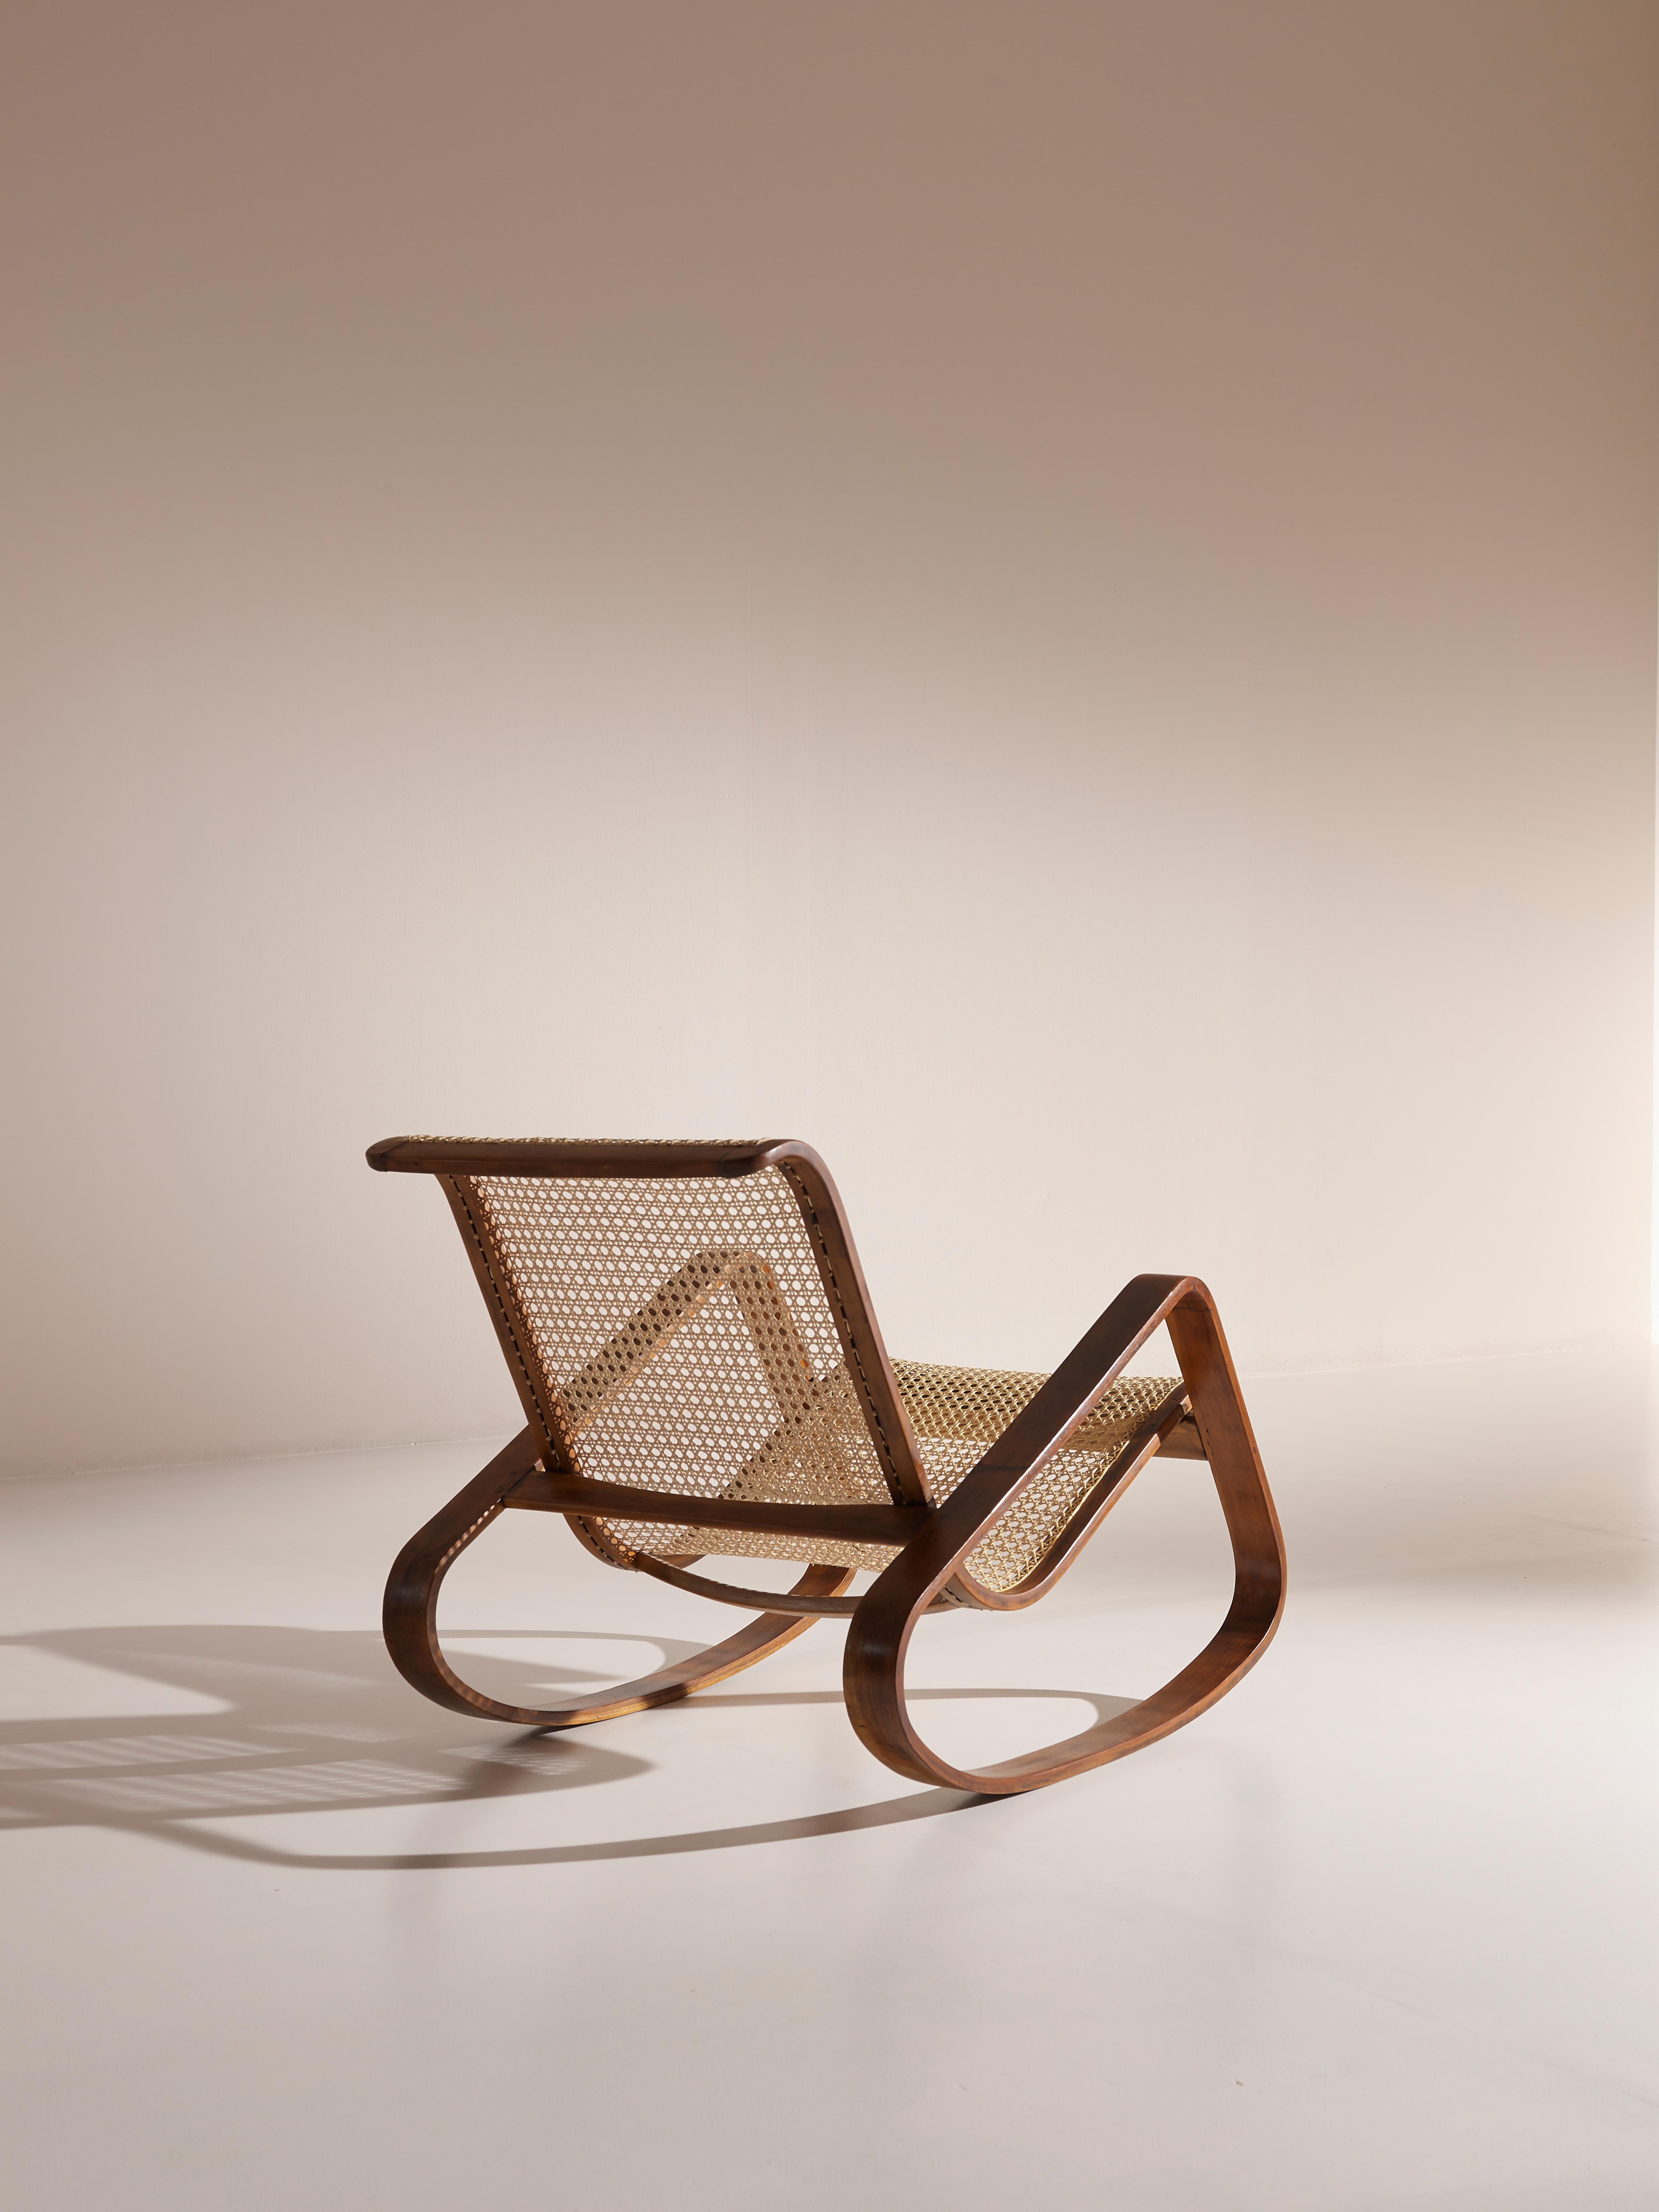 Italian Caned Rocking Chair Made by Porino, Italy, 1930s